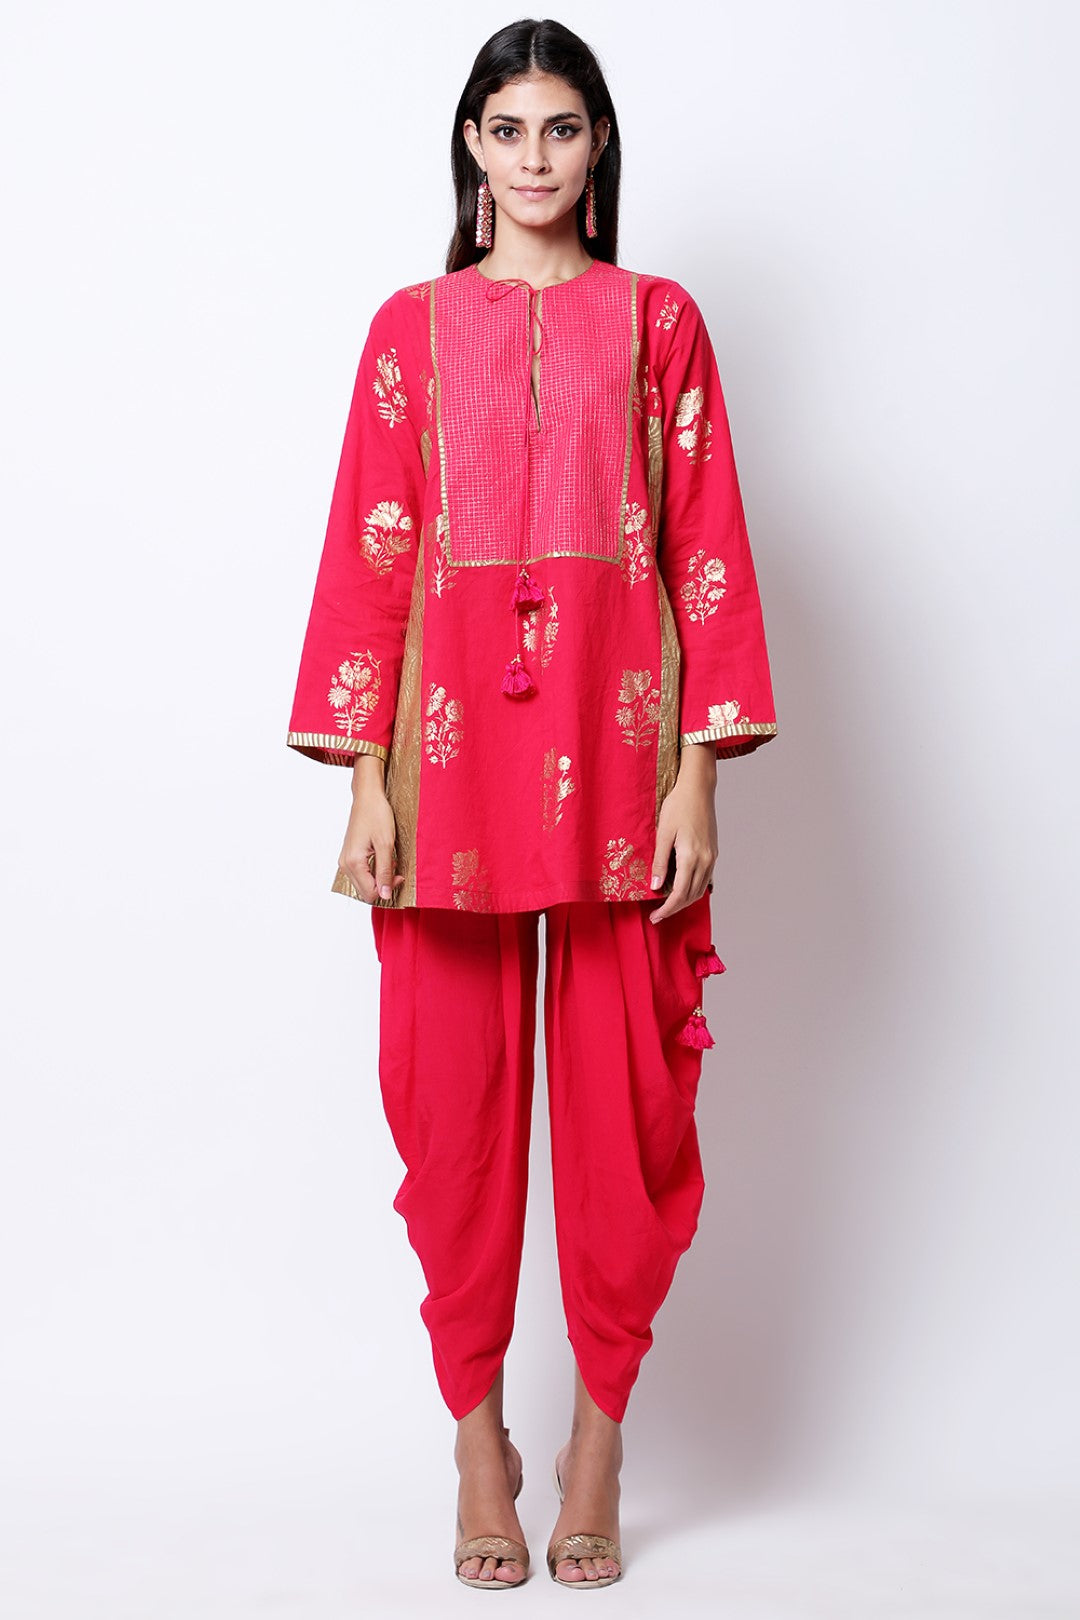 Rani Pink gold printed kurta with chevron side panel details , paired with dhoti.